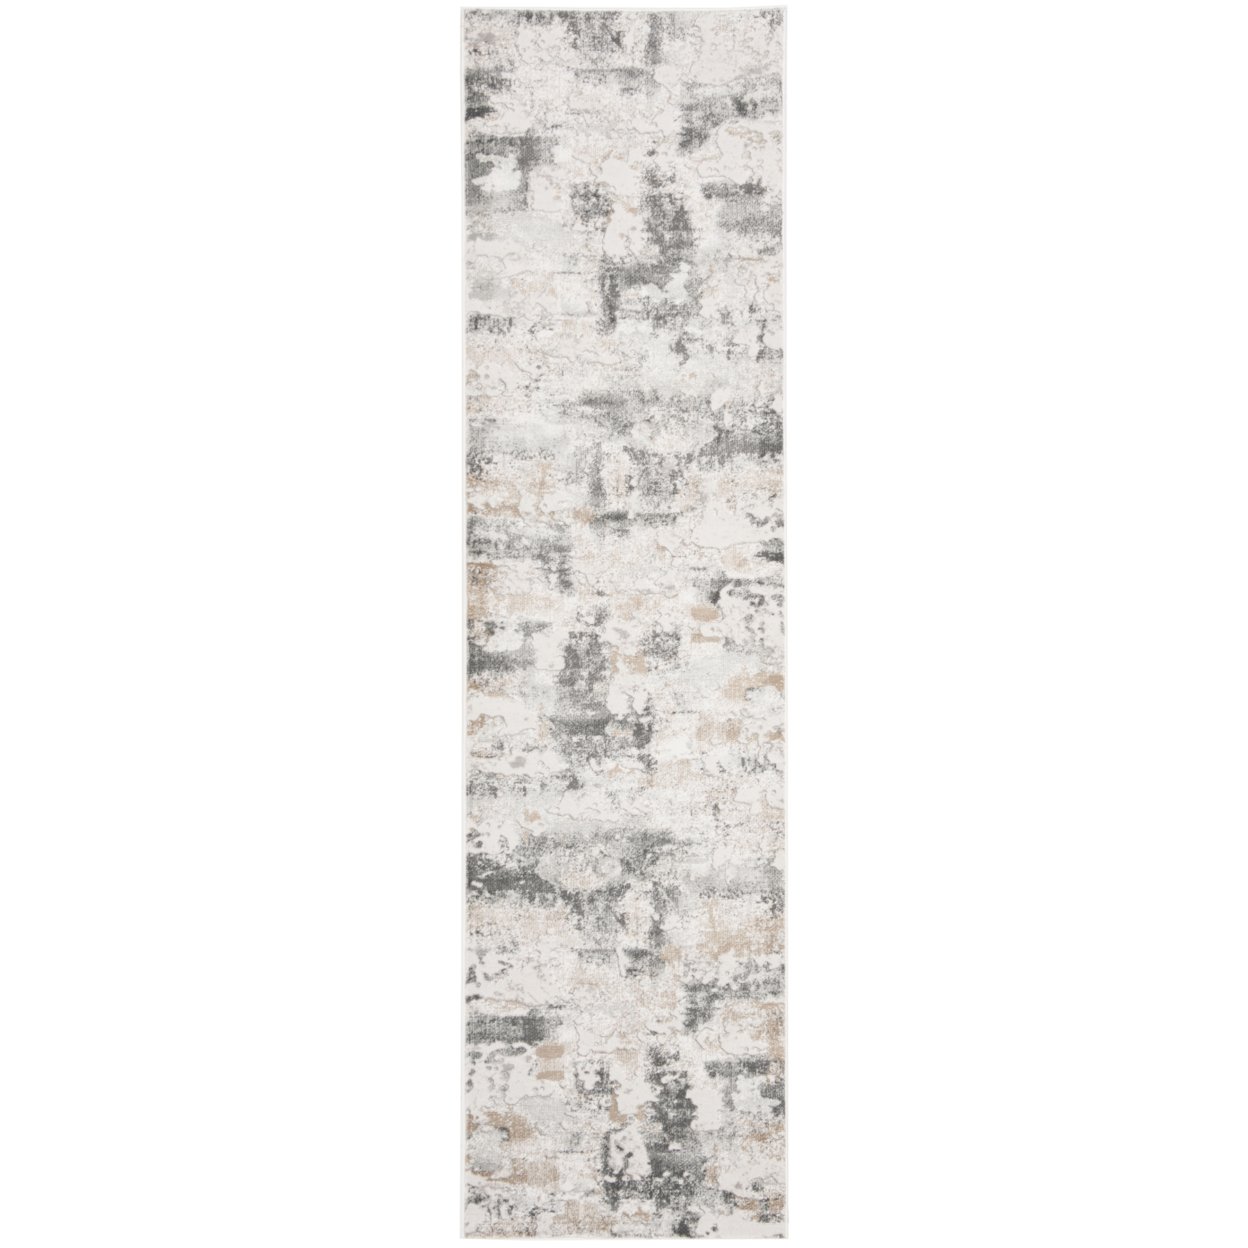 SAFAVIEH Vogue Collection VGE141A Beige / Charcoal Rug - 2' X 12'